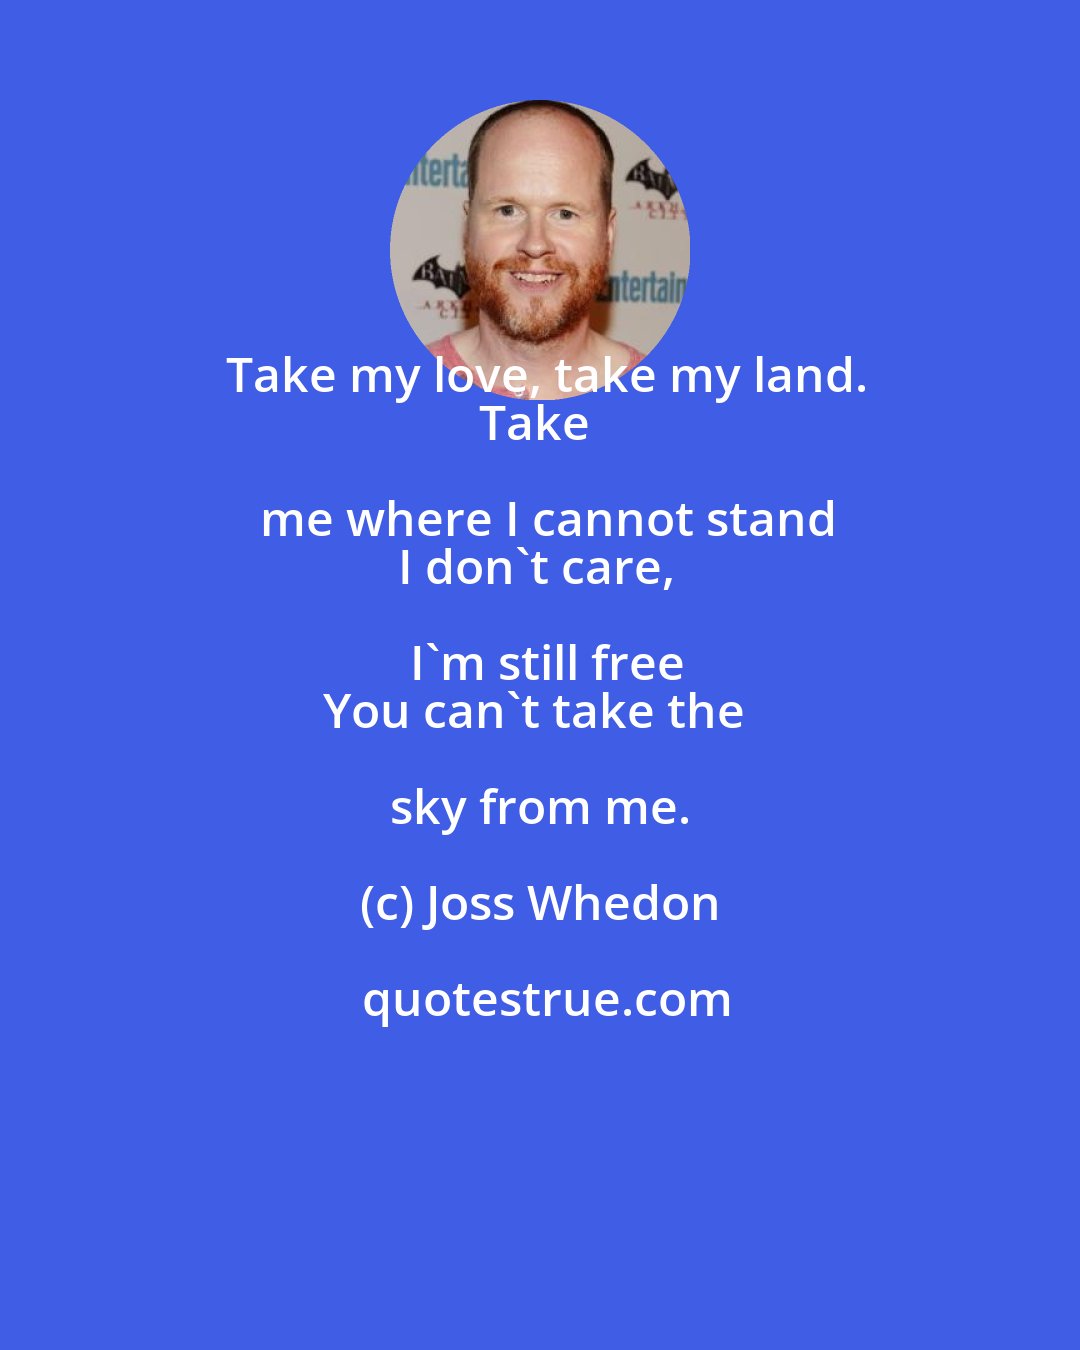 Joss Whedon: Take my love, take my land.
Take me where I cannot stand
I don't care, I'm still free
You can't take the sky from me.